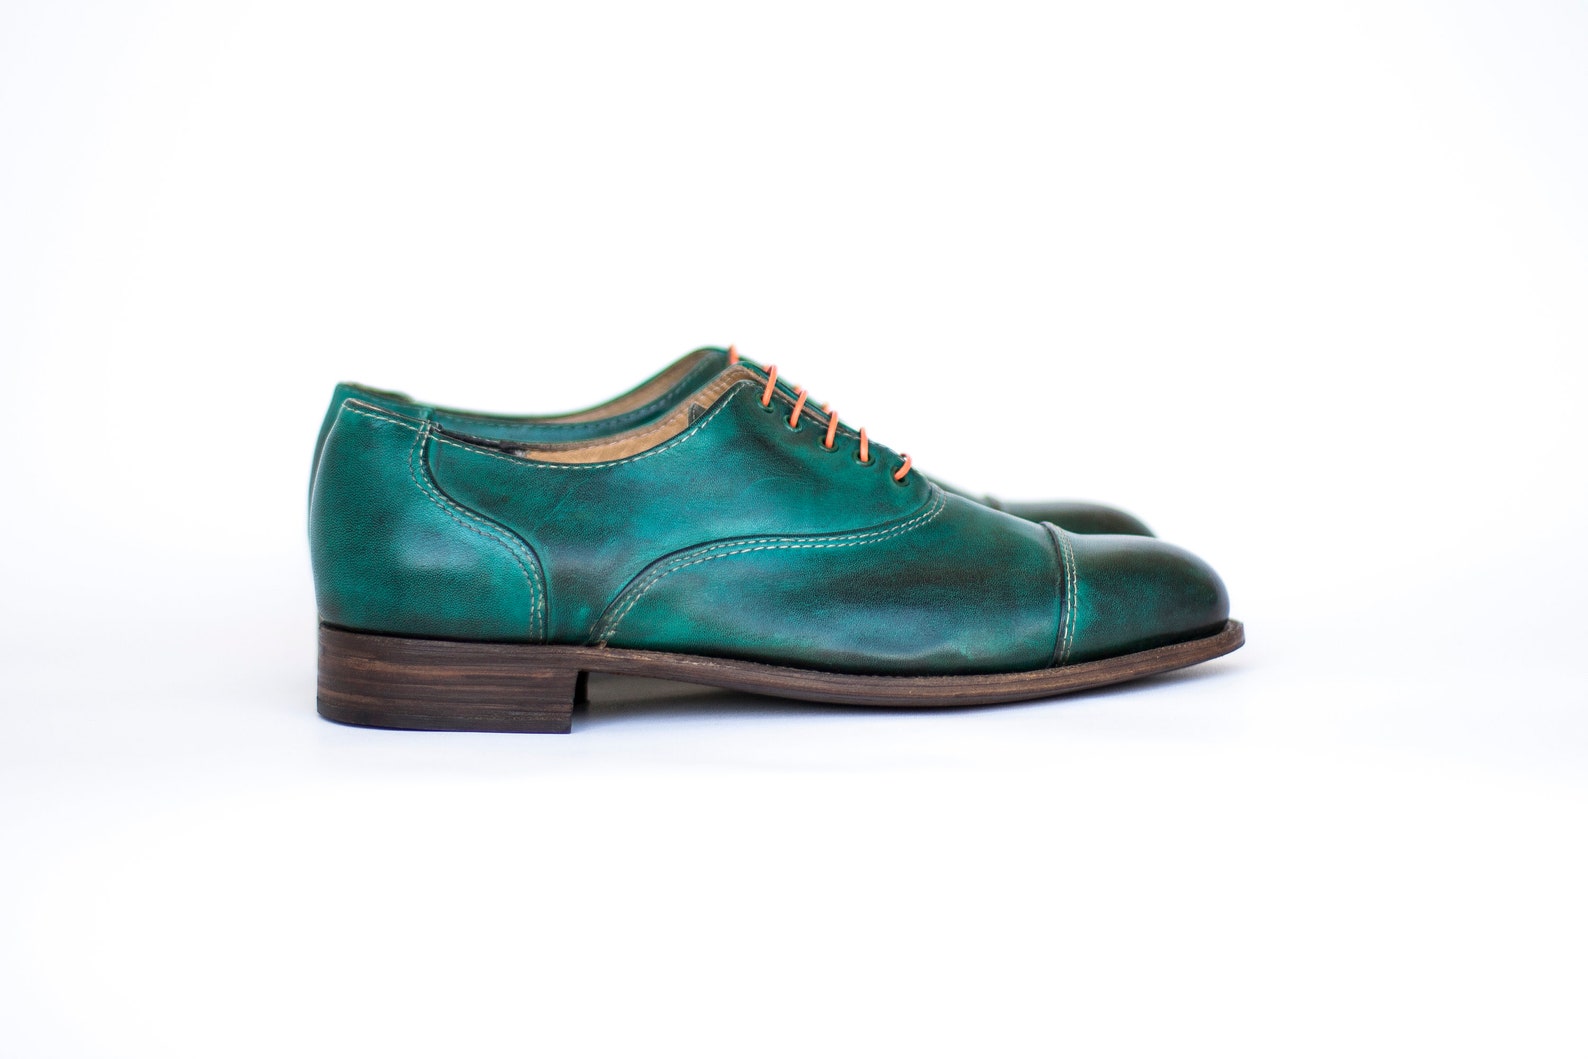 Green Leather Oxford Shoes for Men and Women Bespoke Leather - Etsy